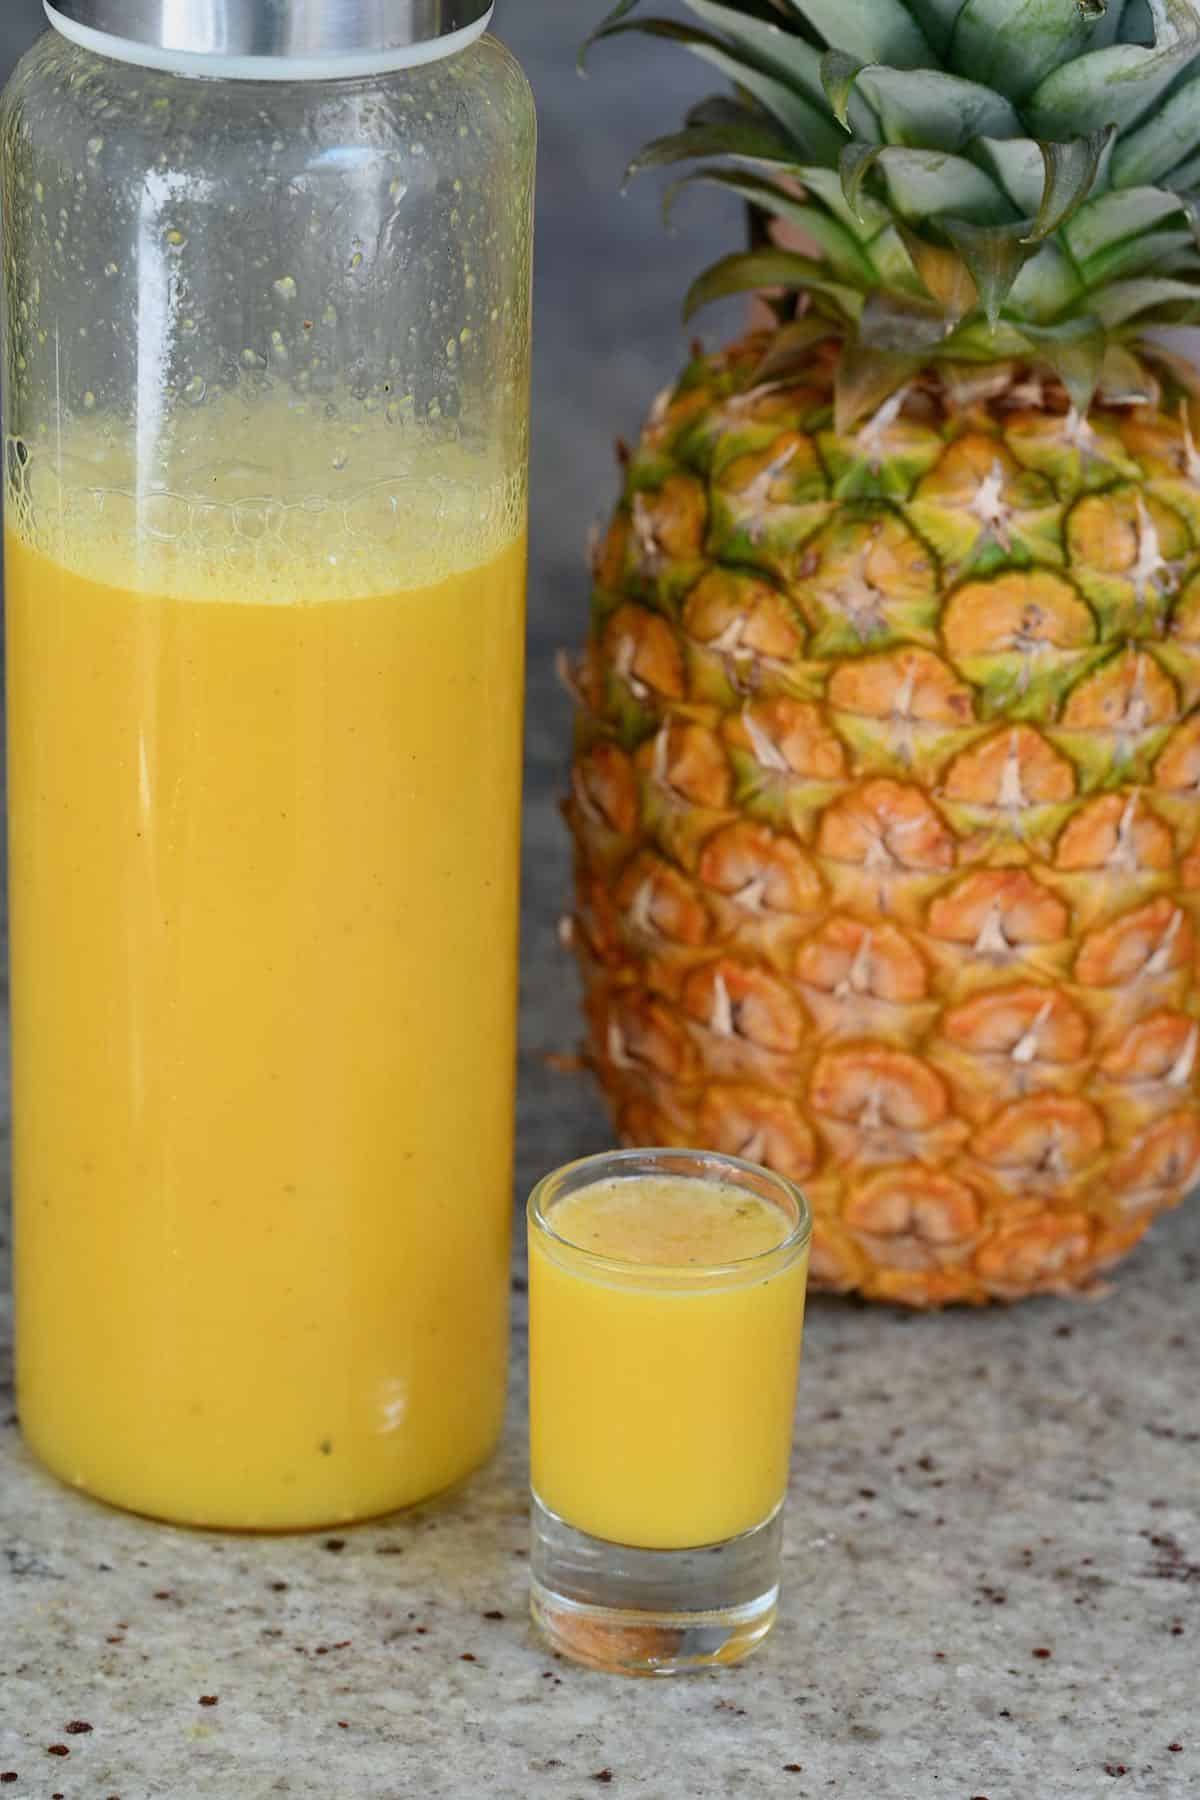 Pineapple ginger juice in a bottle and in a small glass